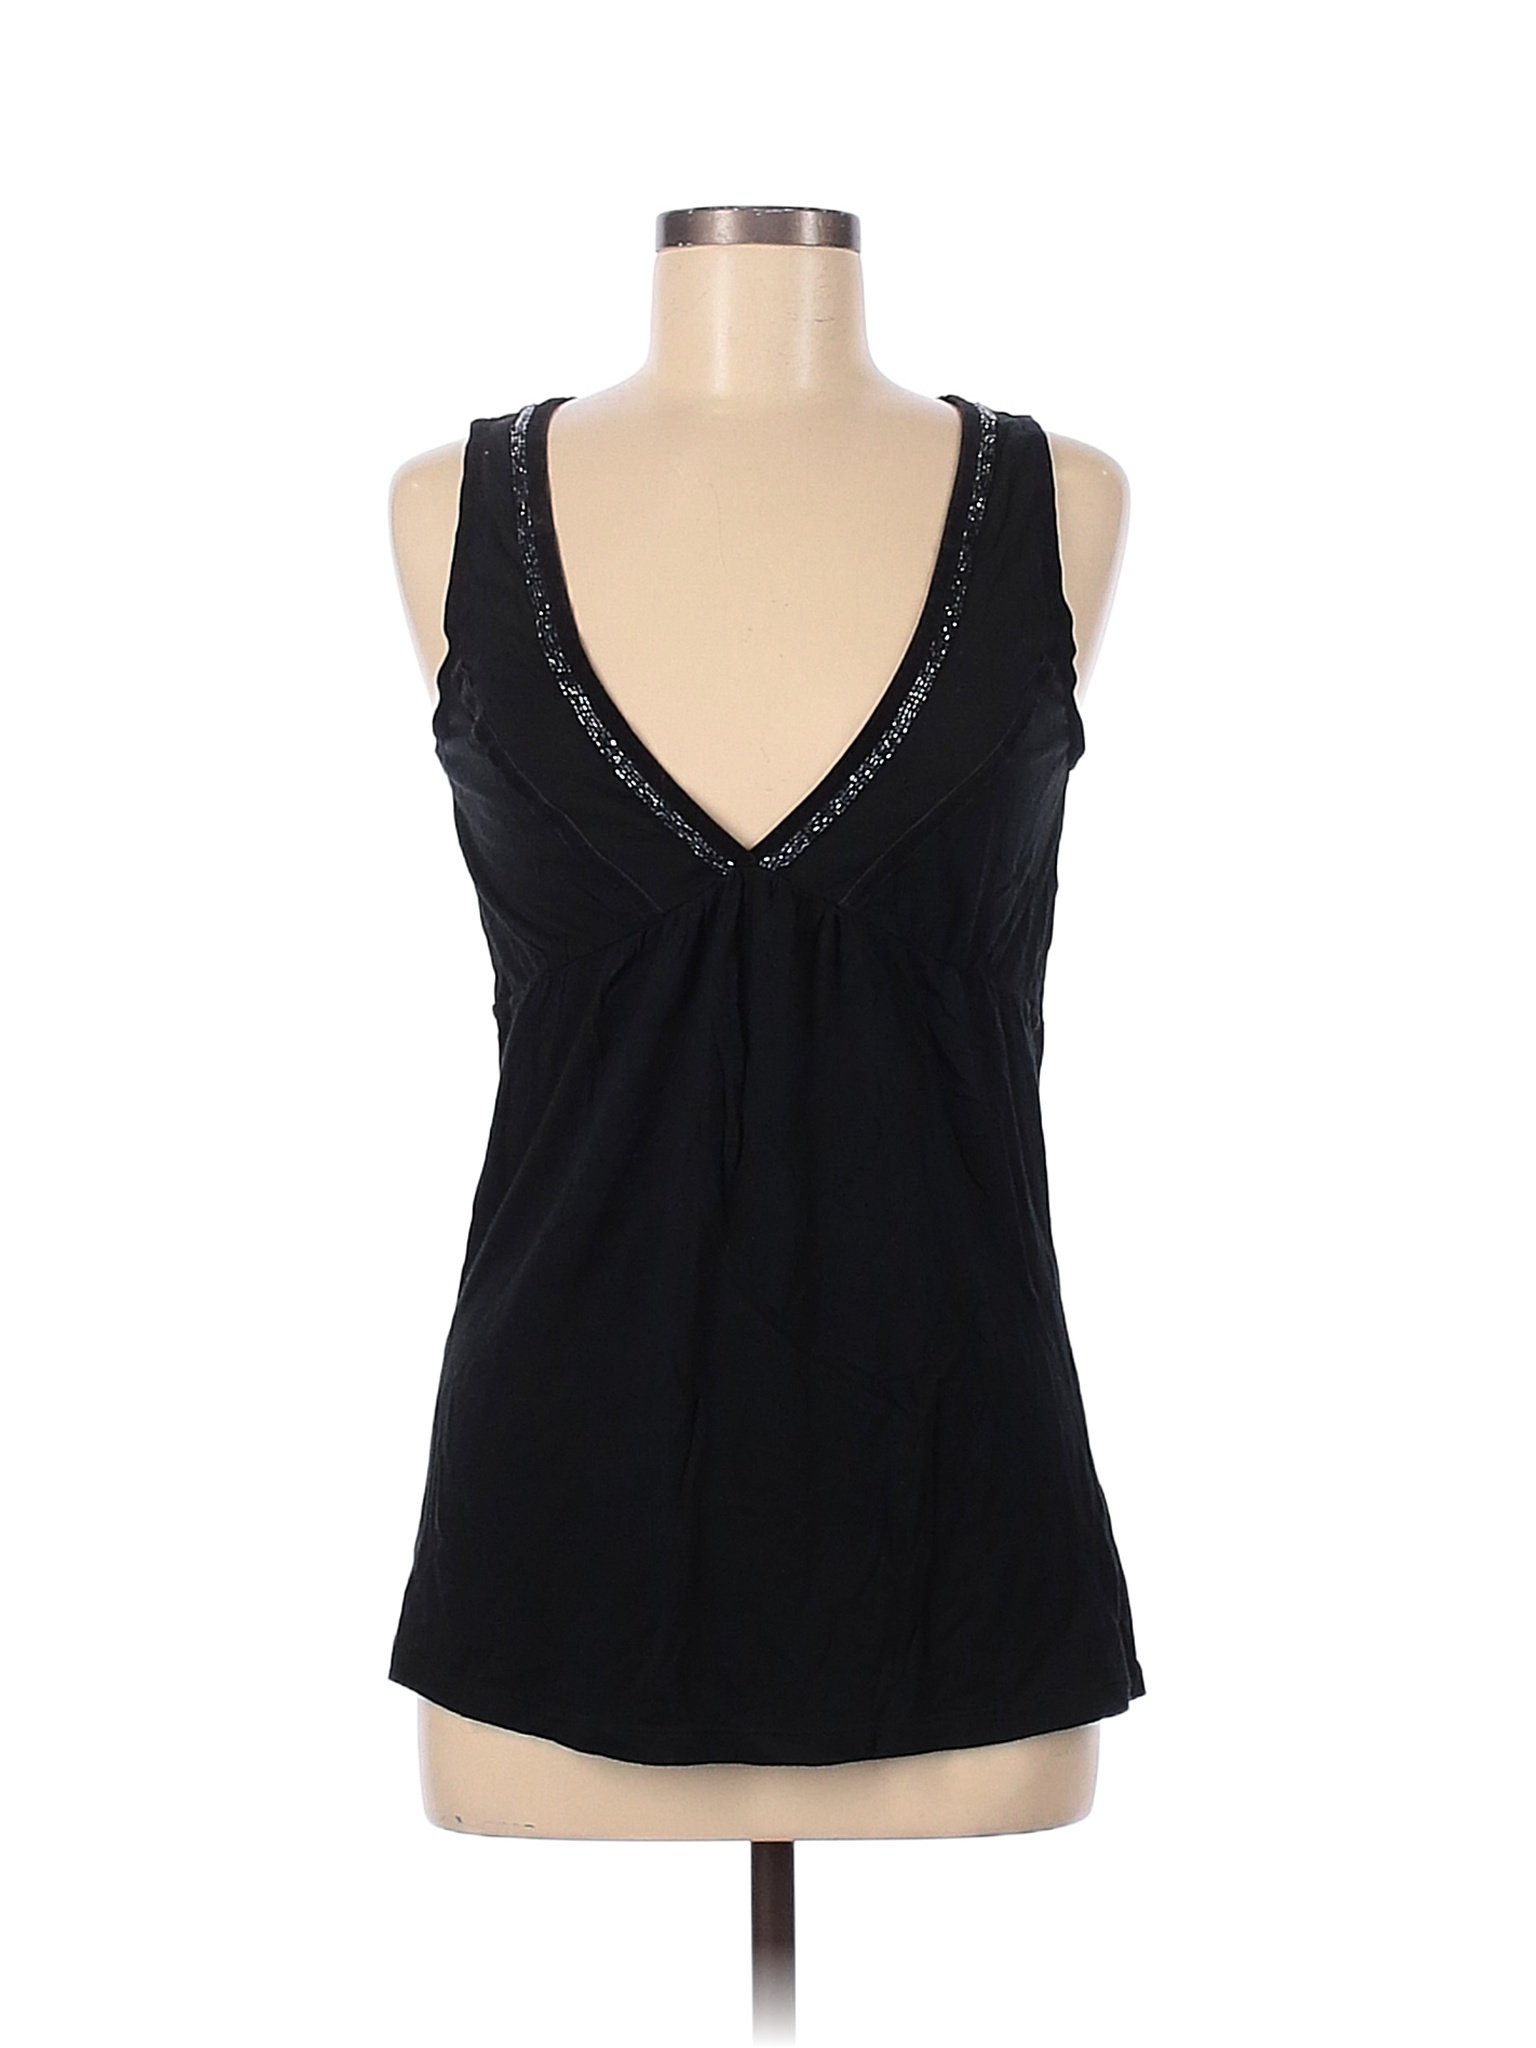 Old Navy Solid Black Sleeveless Top Size L - 47% off | thredUP